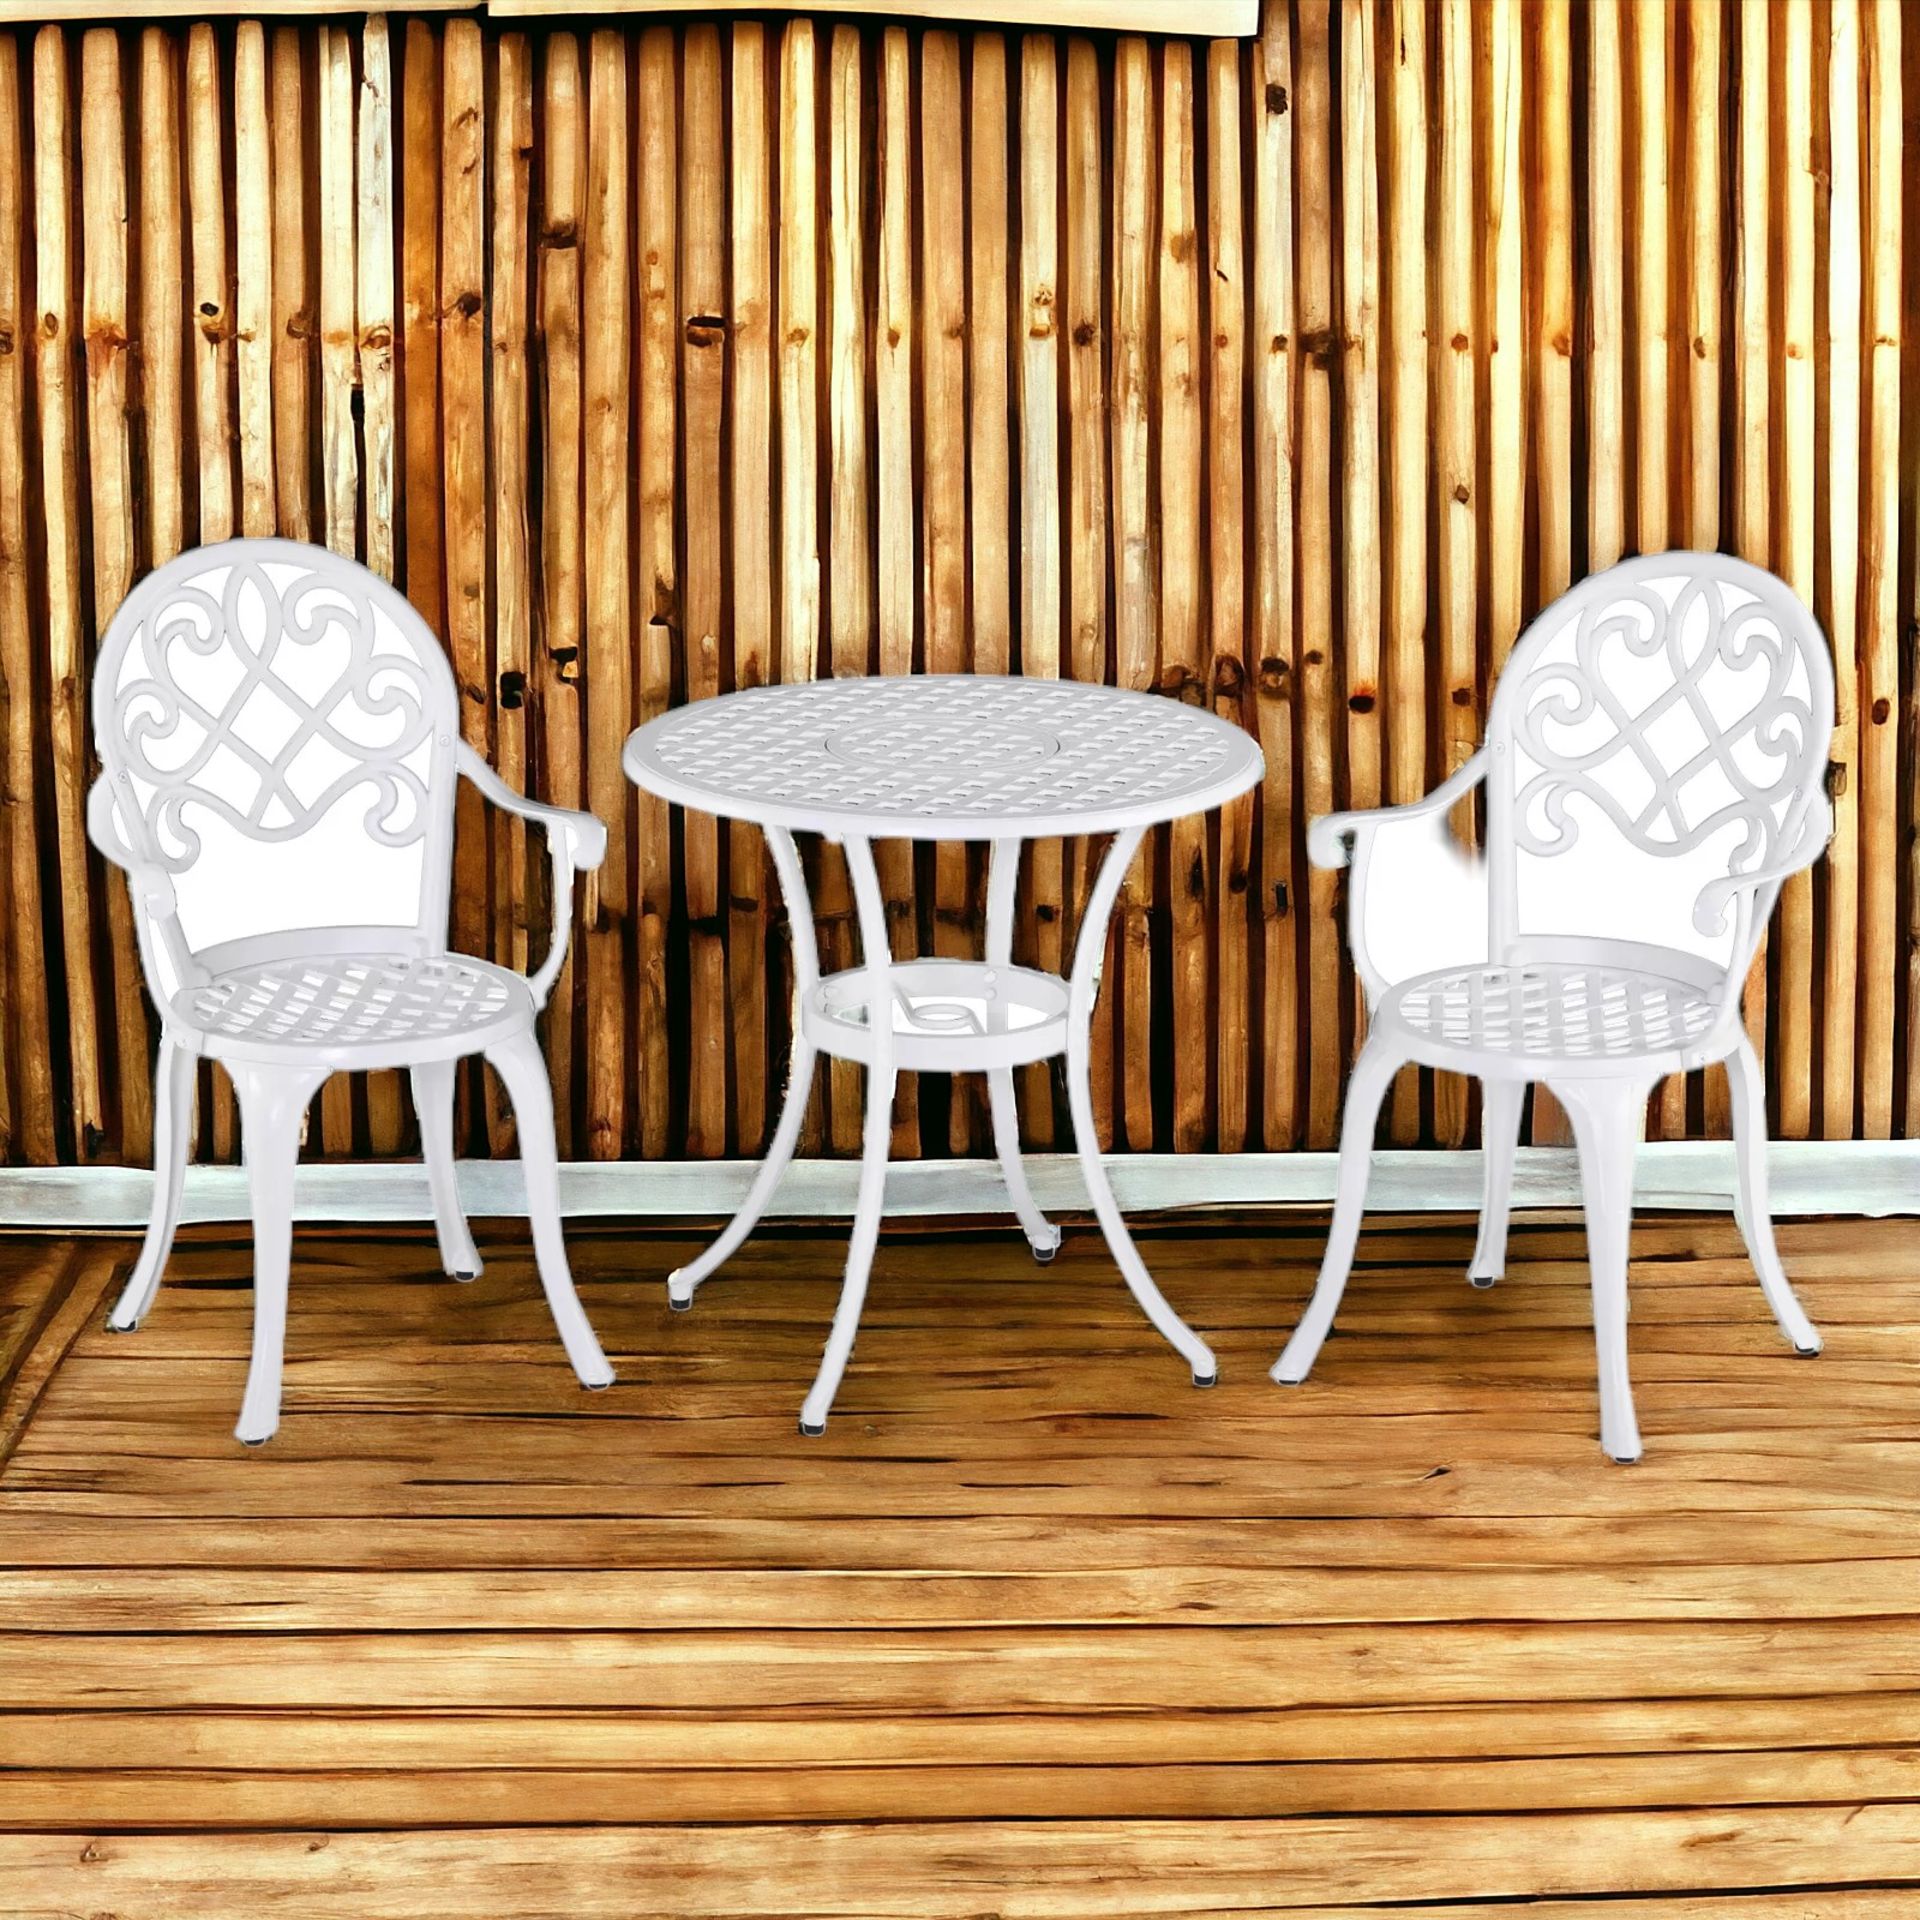 FREE DELIVERY- BRAND NEW 3PCS GARDEN BISTRO SET CAST ALUMINIUM ROUND TABLE WITH 2 CHAIRS WHITE - Image 2 of 2